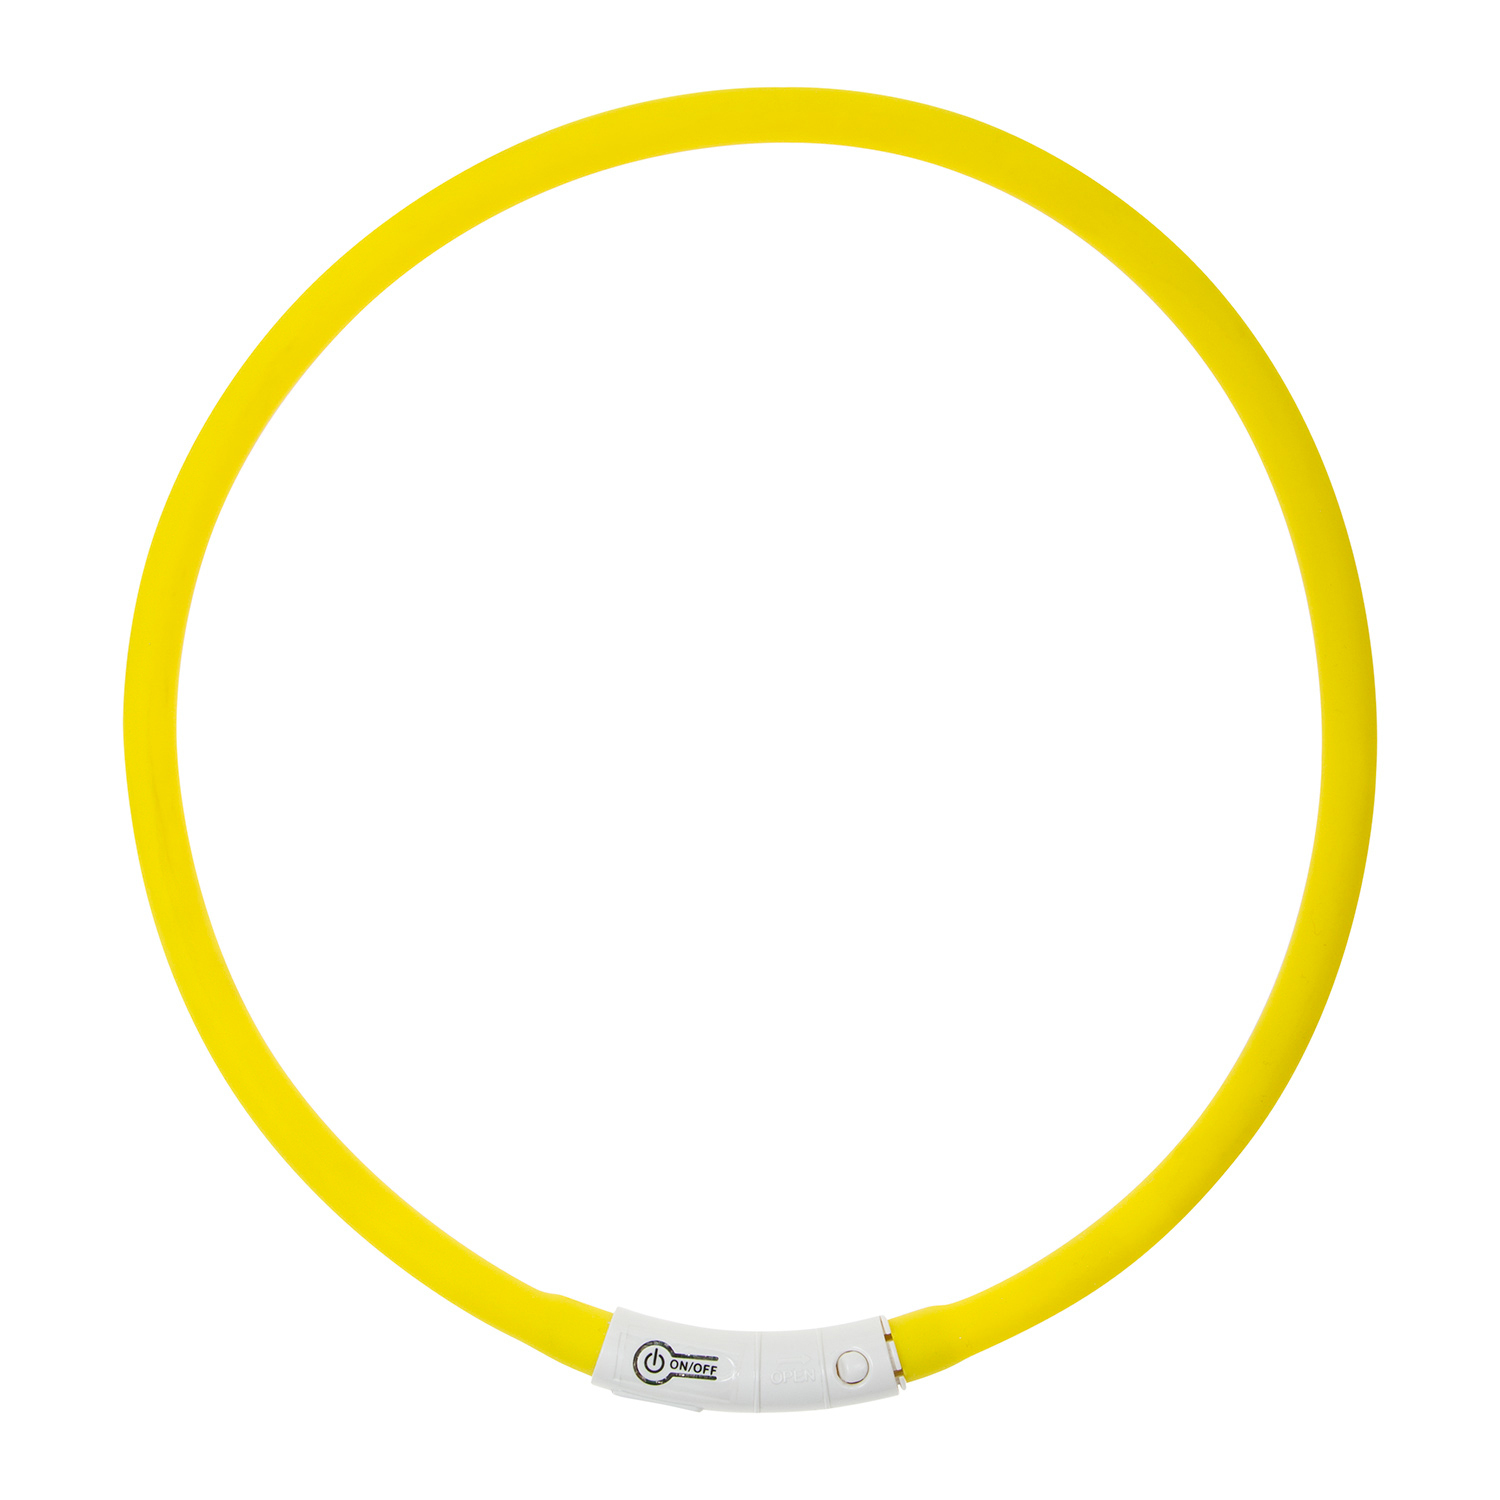 Clever Paws USB Rechargeable Flashing Pet Halo - Yellow Image